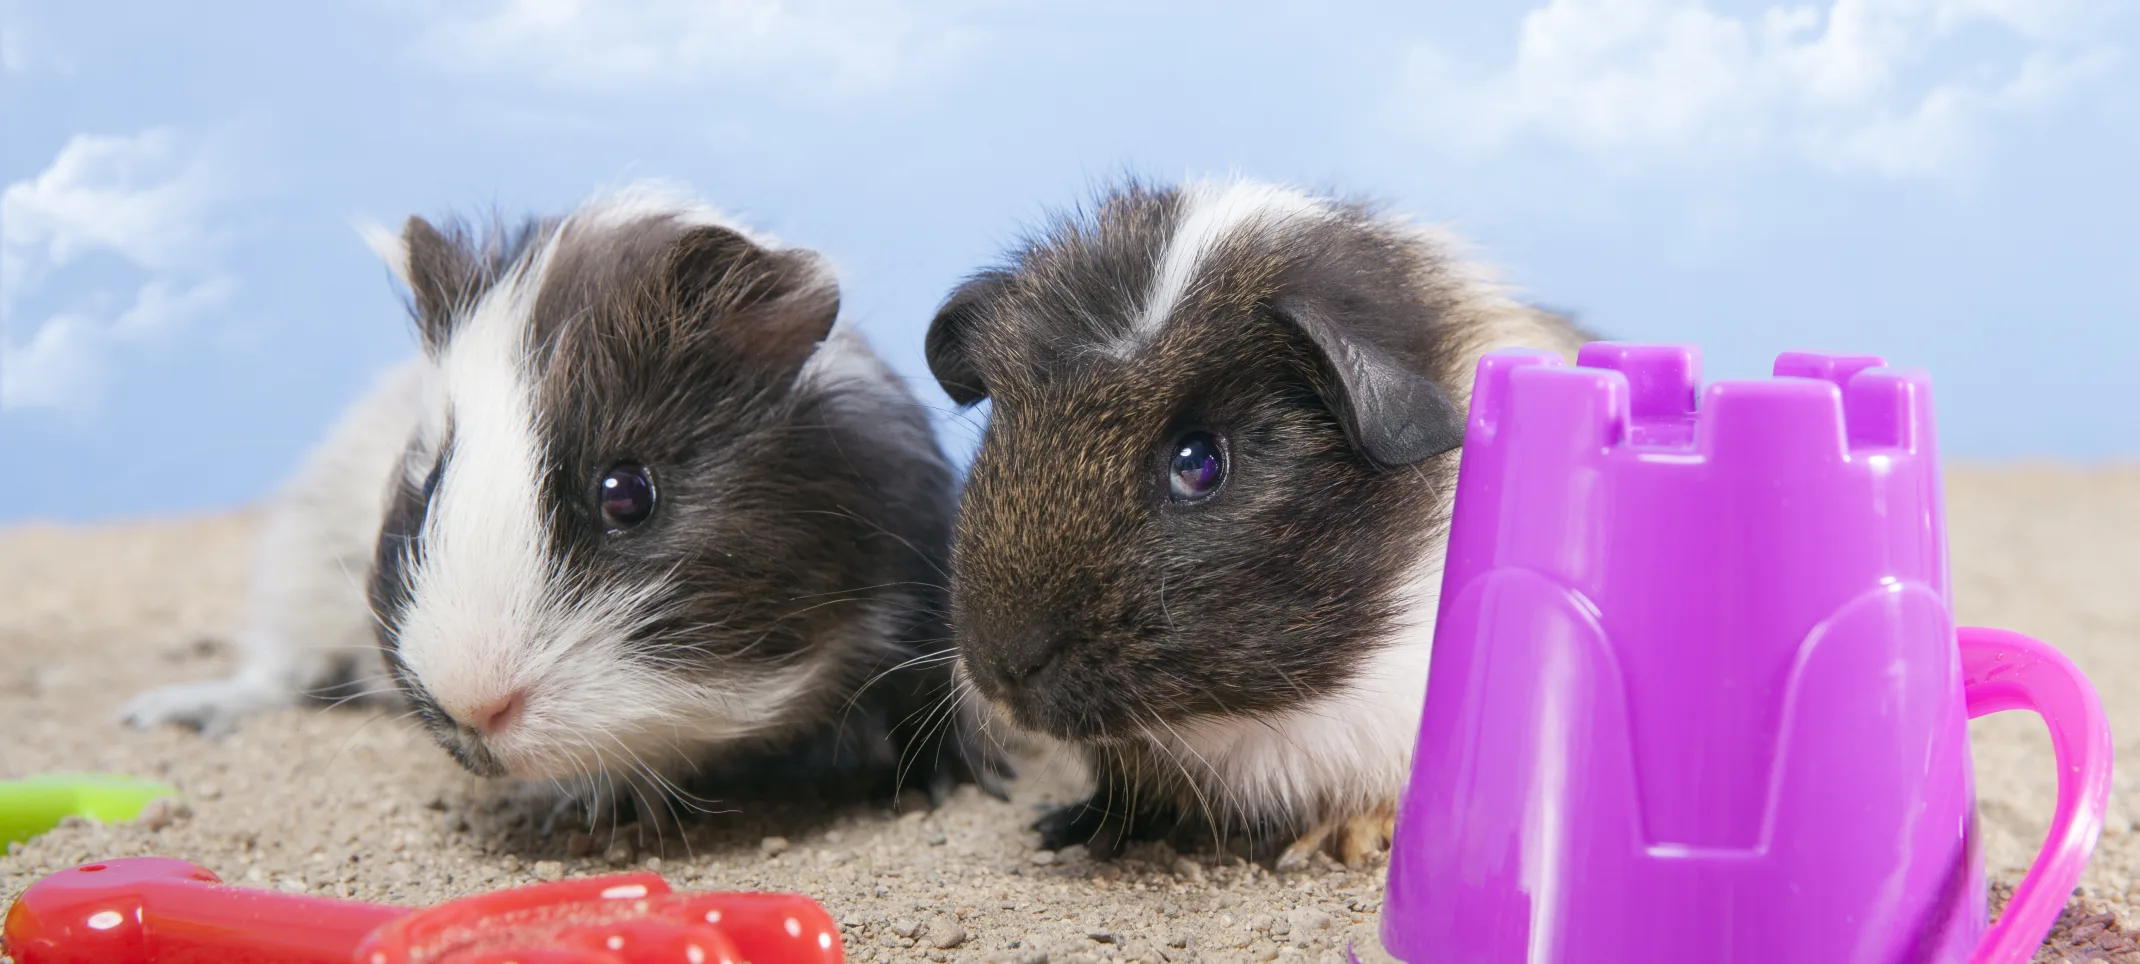 Two guinea pigs with toys.